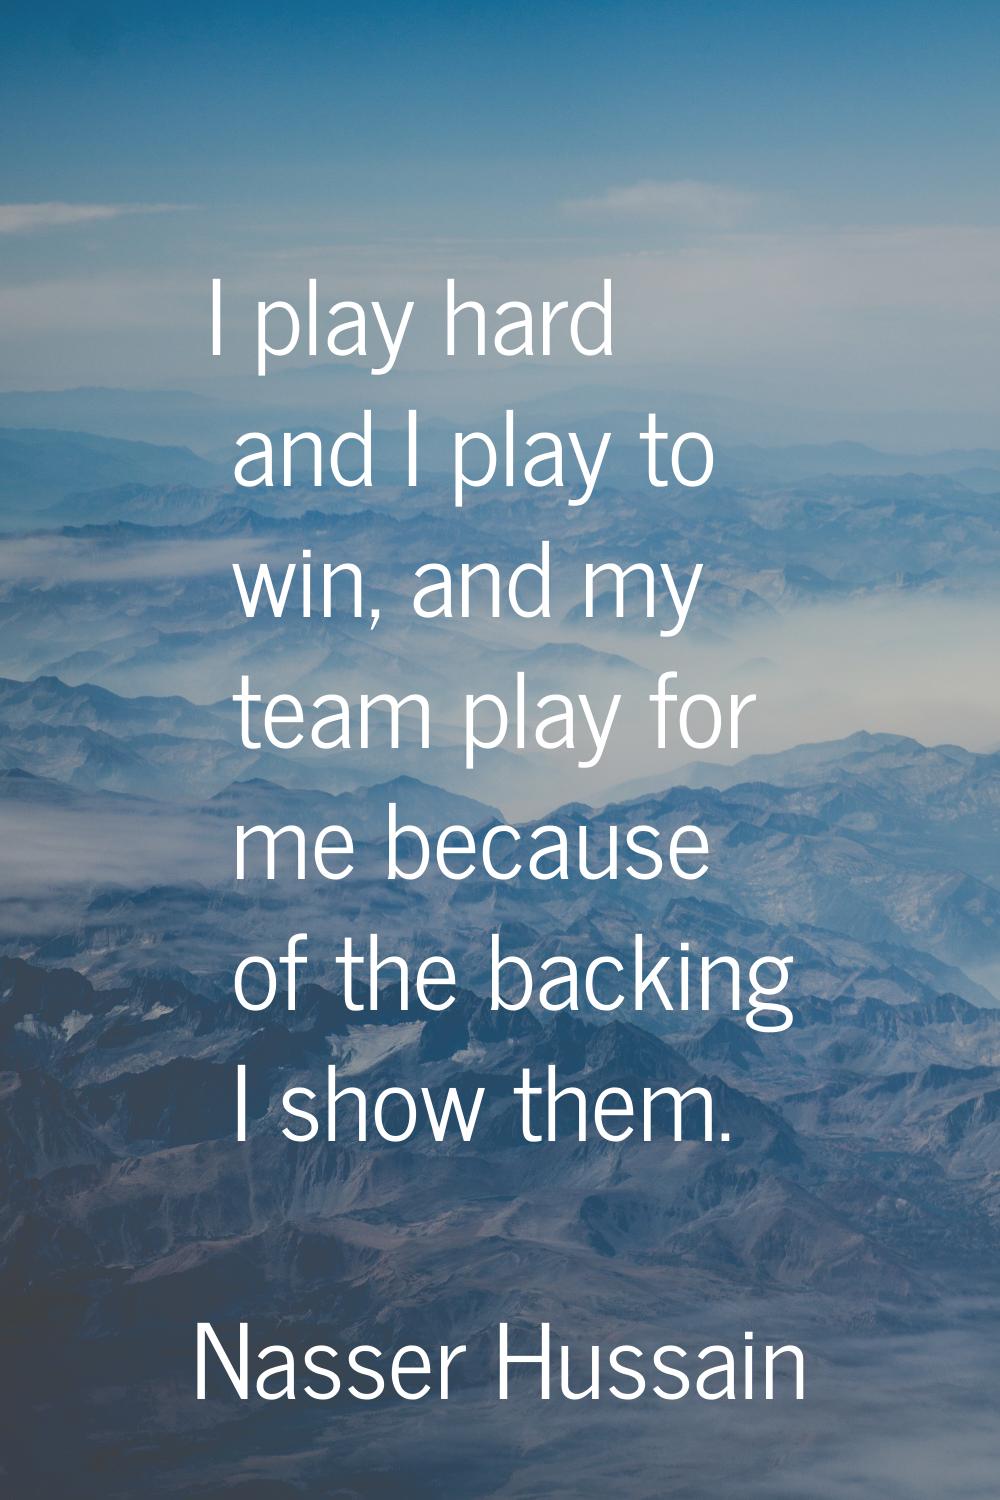 I play hard and I play to win, and my team play for me because of the backing I show them.